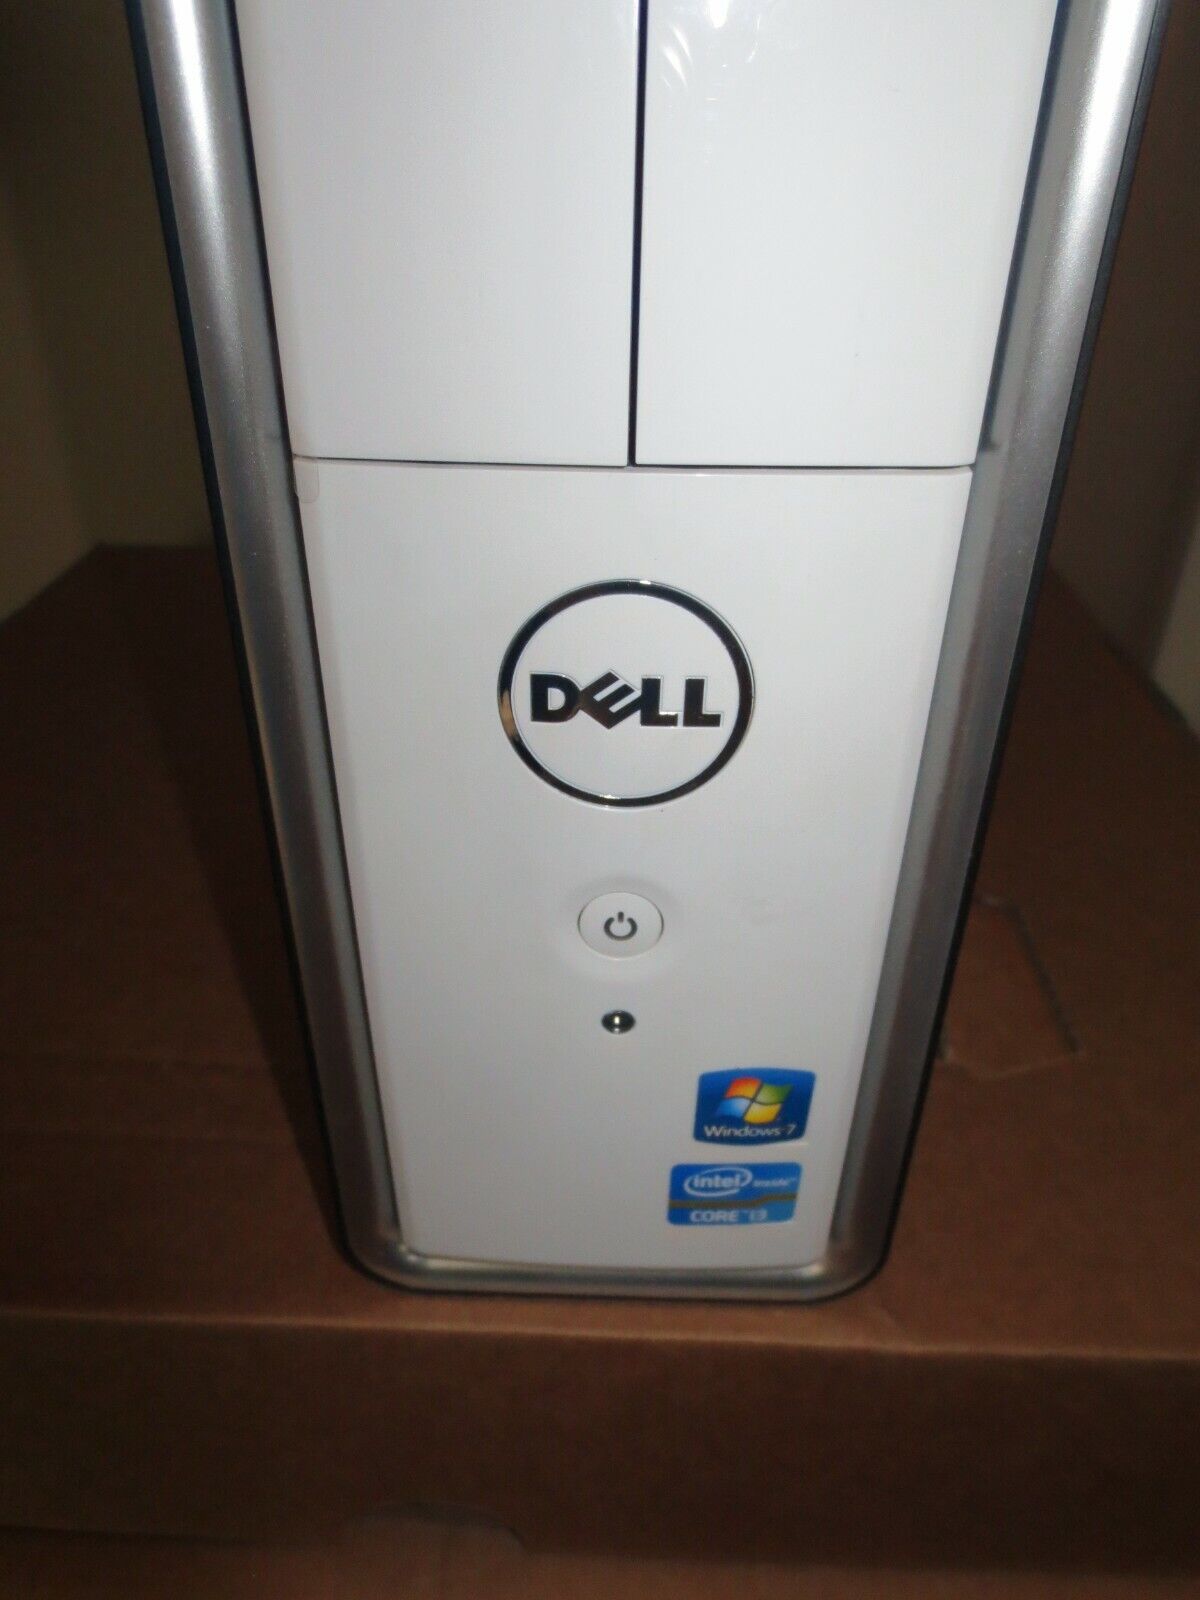 Dell Inspiron 620 S - Slim Tower Desk Top Computer With Windows 10